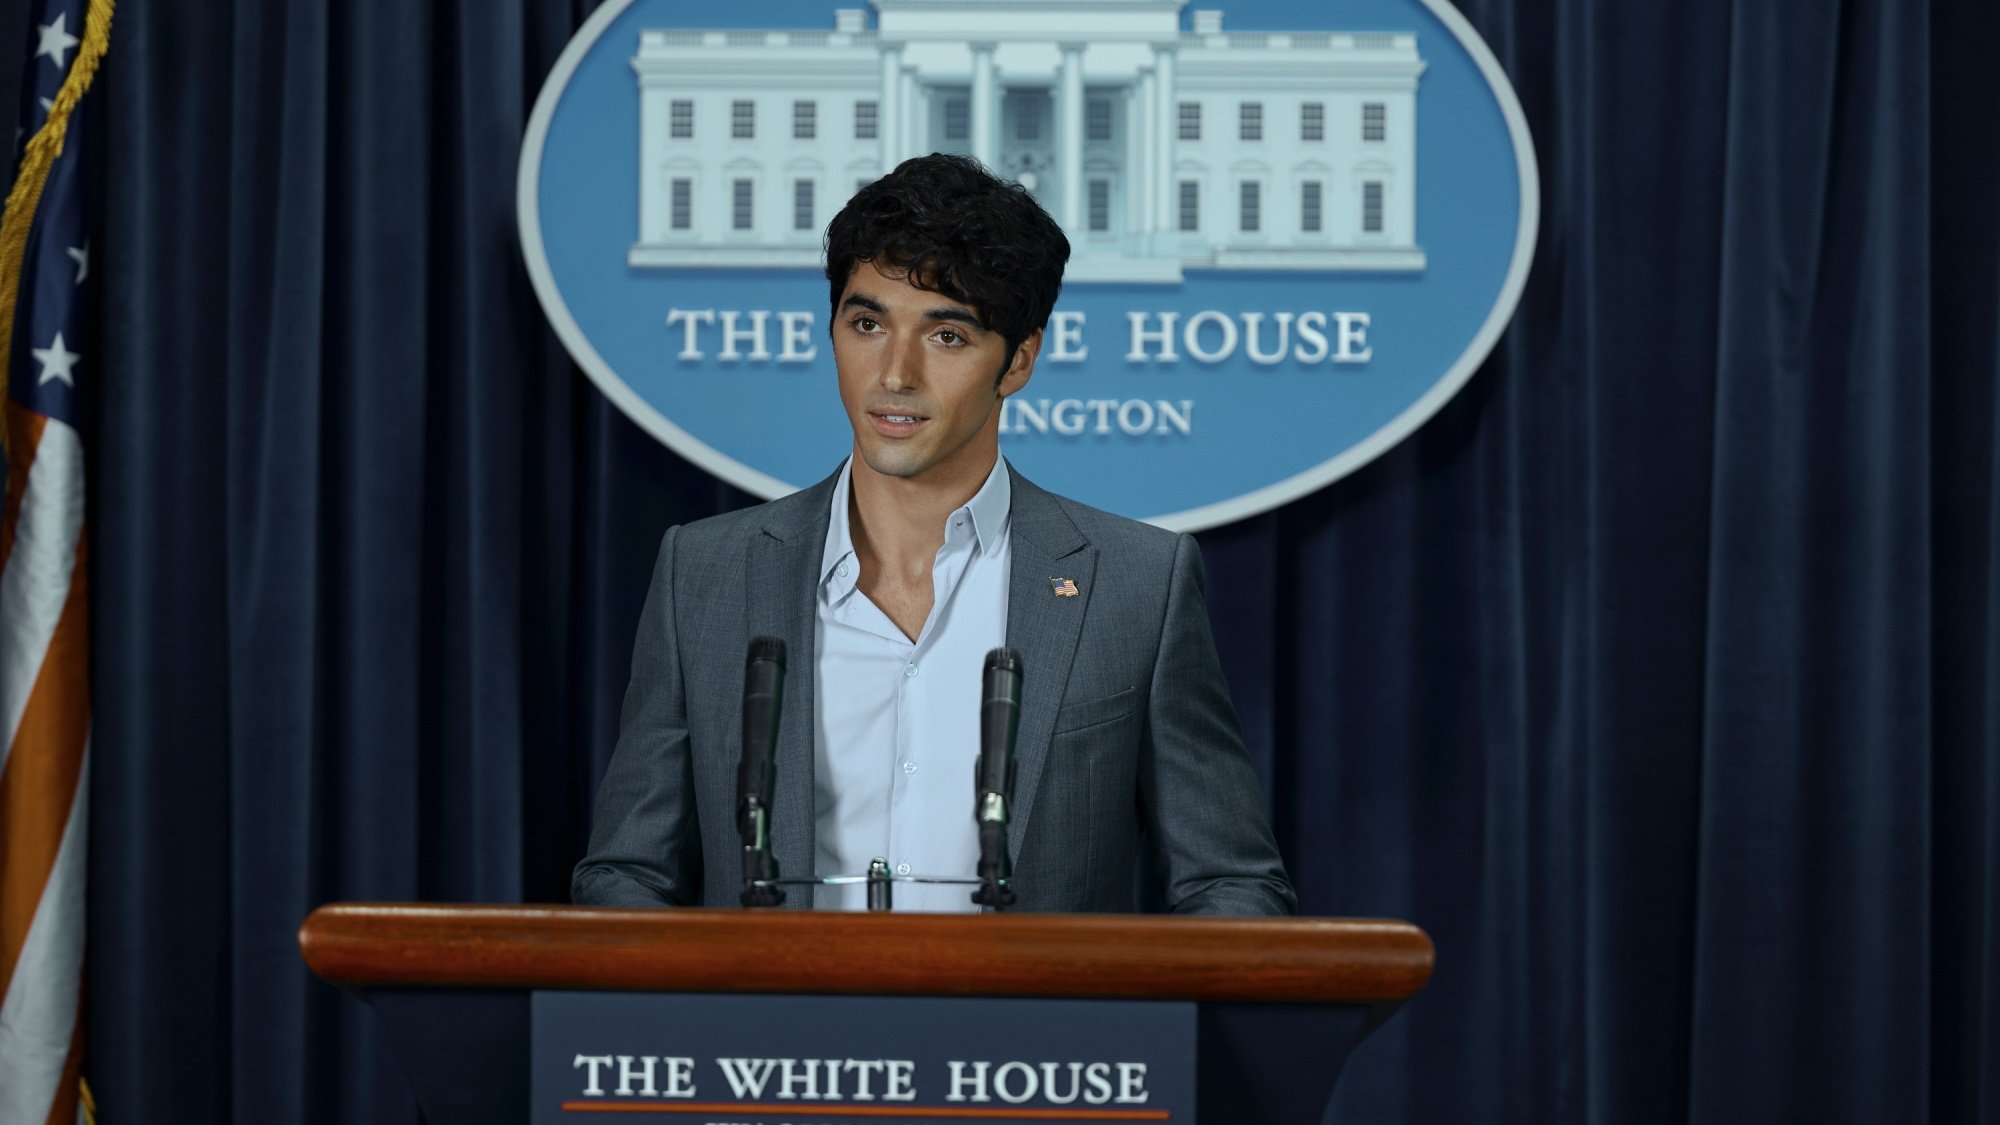 A dark-haired man in a suit speaks at a podium in the White House press room.